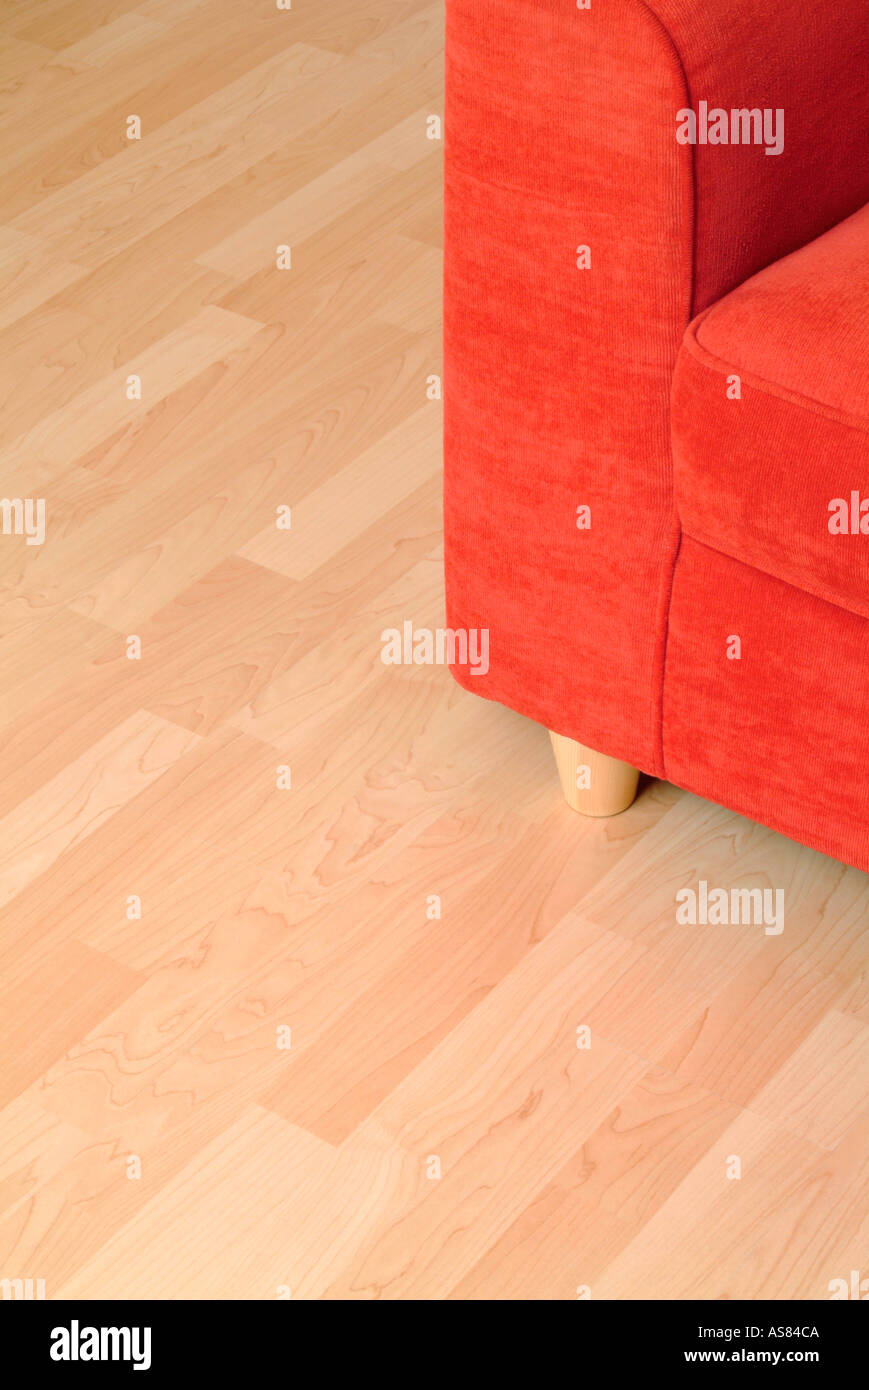 red sofa on a wooden floor Stock Photo